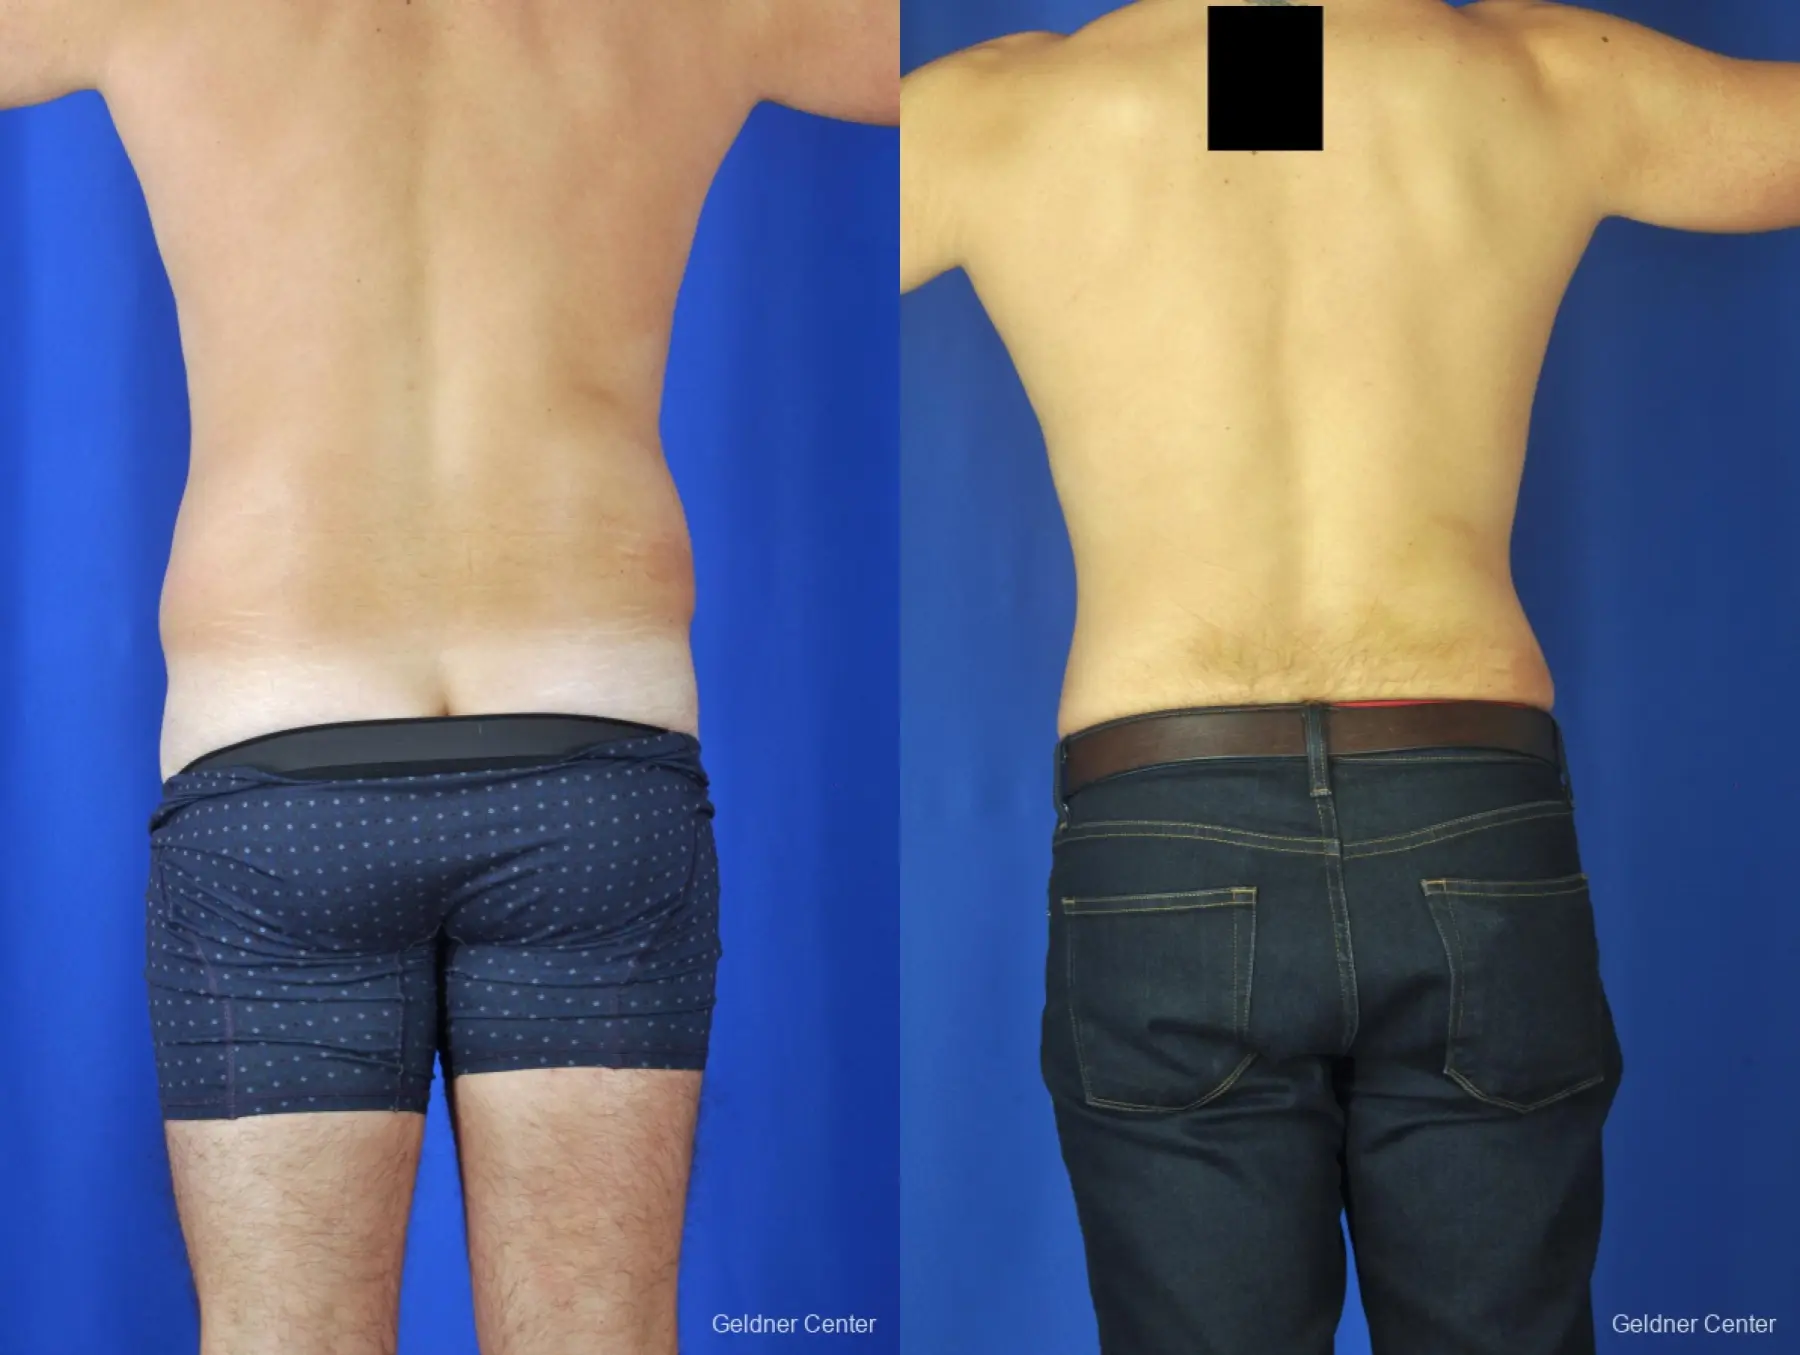 Liposuction For Men: Patient 4 - Before and After 4